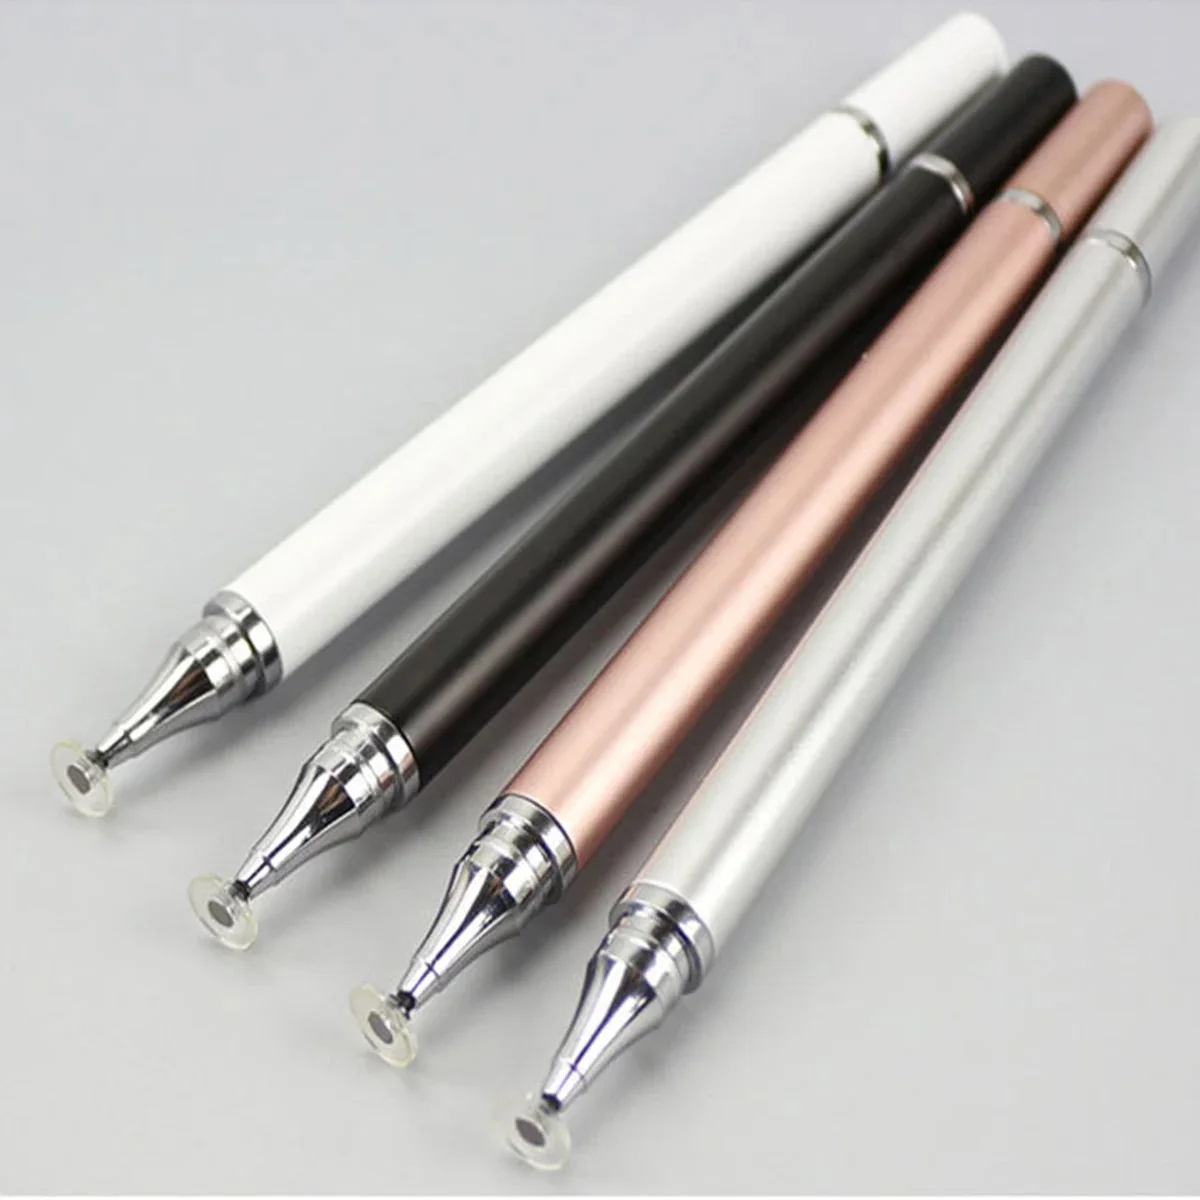 ANMONE 2 In 1 Stylus Pen For Cellphone Tablet Capacitive Touch Pencil For Iphone Samsung Universal  Android Phone Drawing